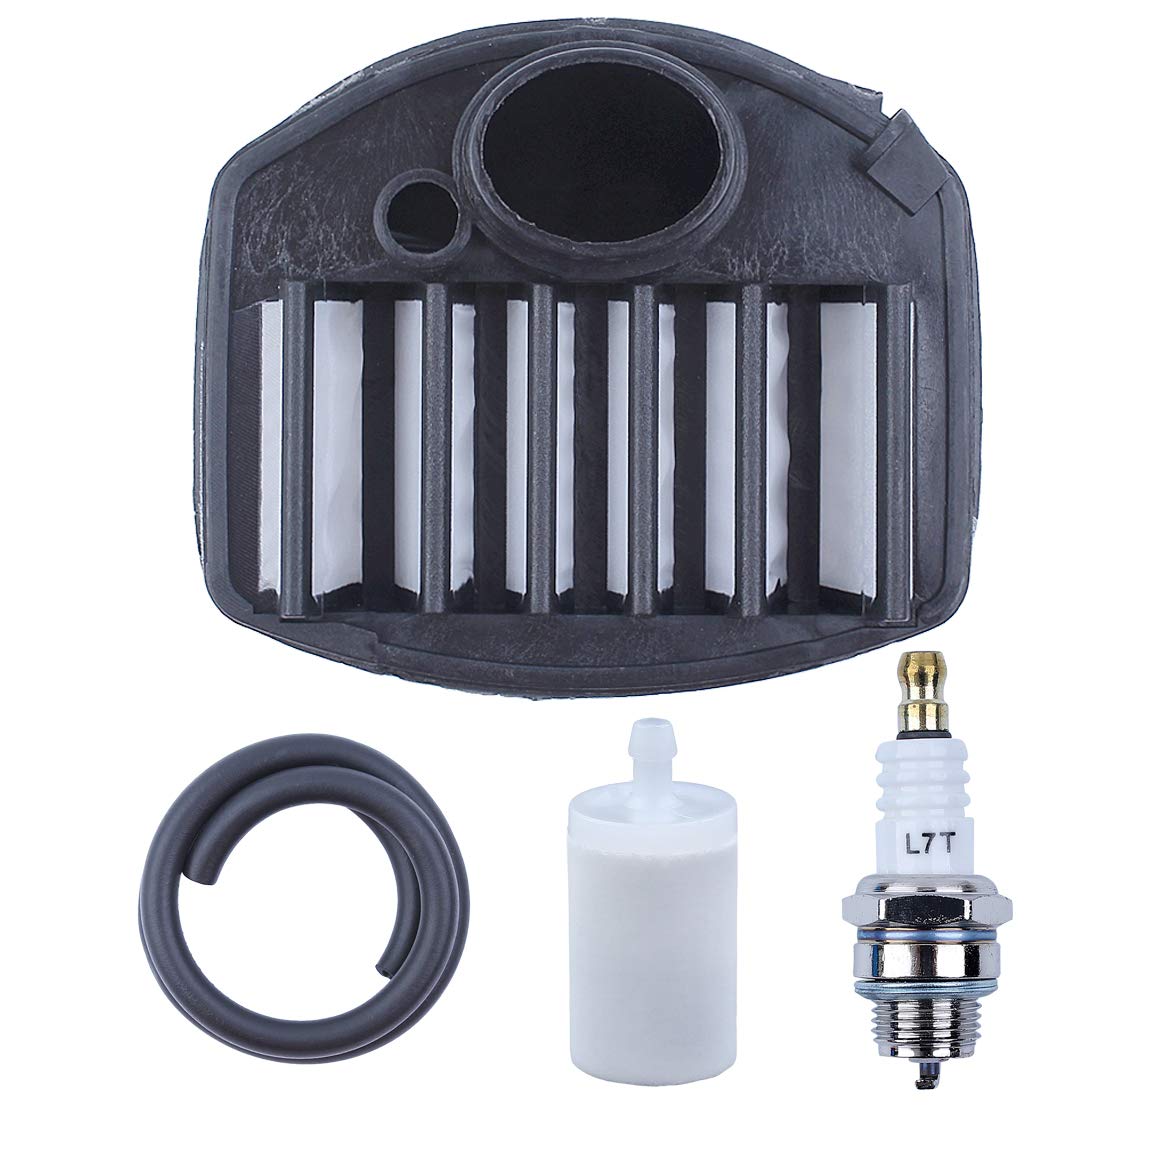 HAISHINE Air Filter Tune up Maintenance Service Kit Fit Hus 357 357XP 359 Jonsered 2156 2159 Chainsaw